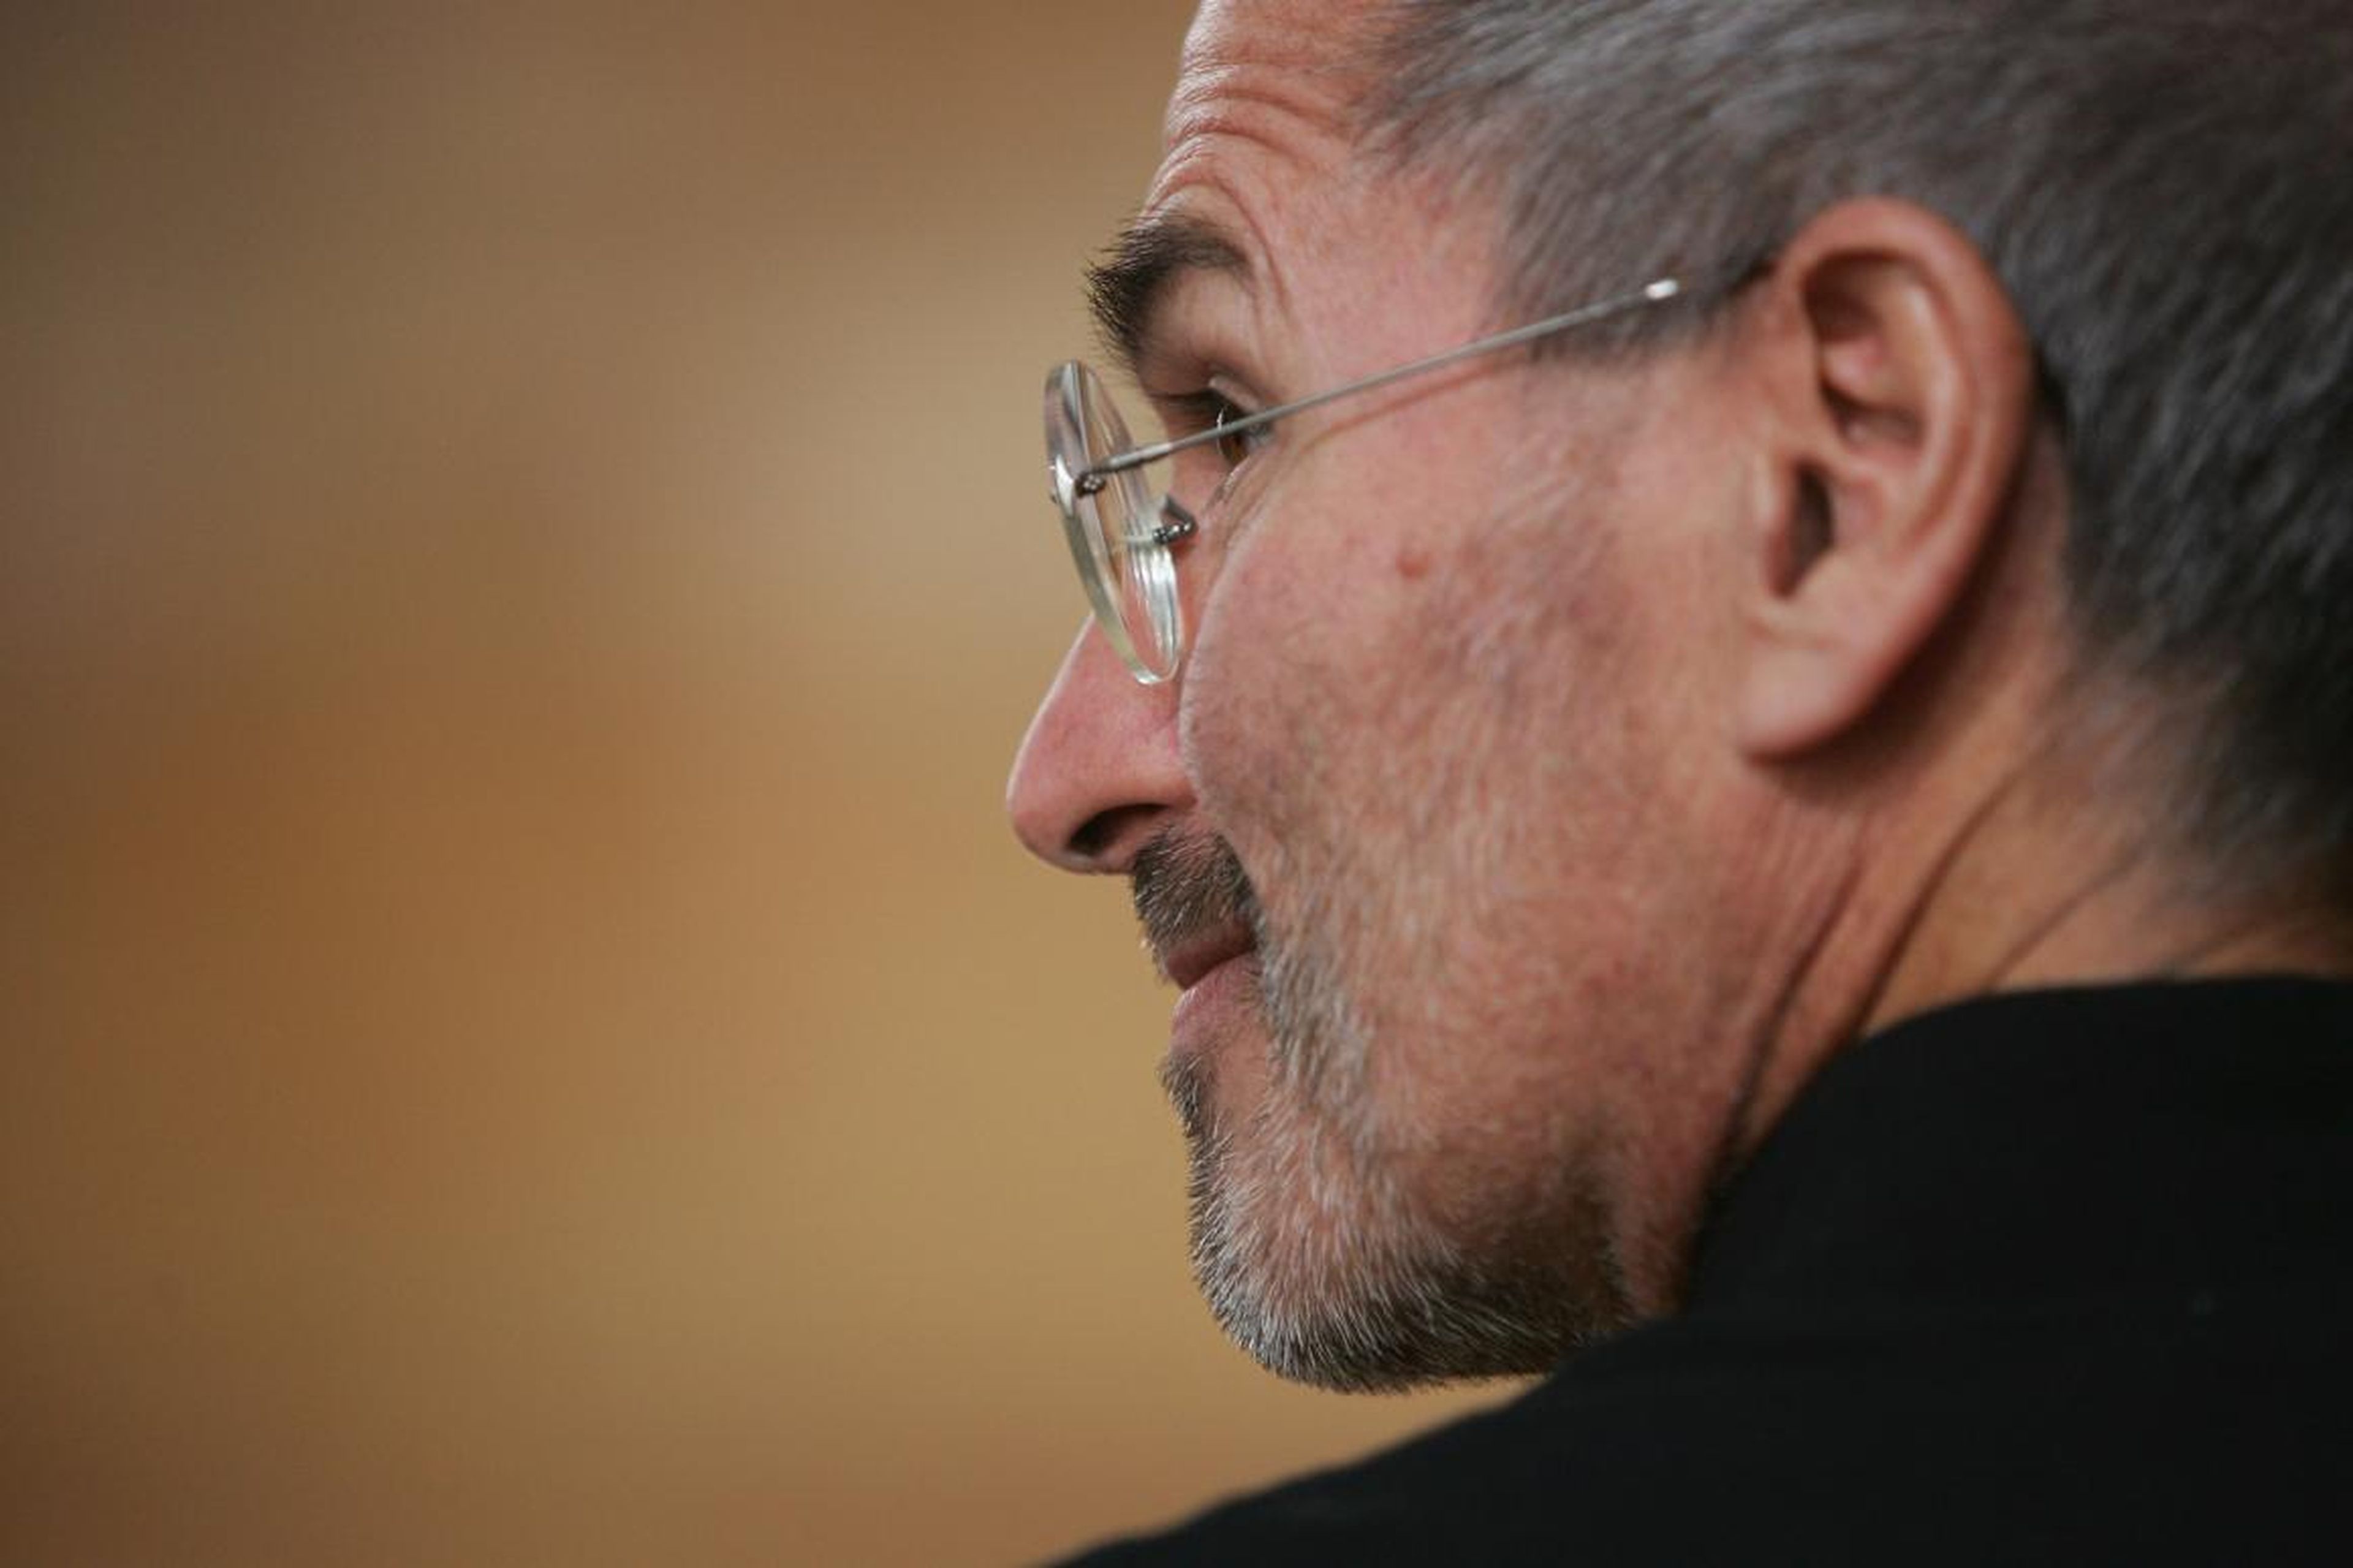 But in 2003 Jobs received some news that would cast a shadow over the good times at Apple: He had pancreatic cancer. He kept it a secret until sharing the news with employees in 2004.